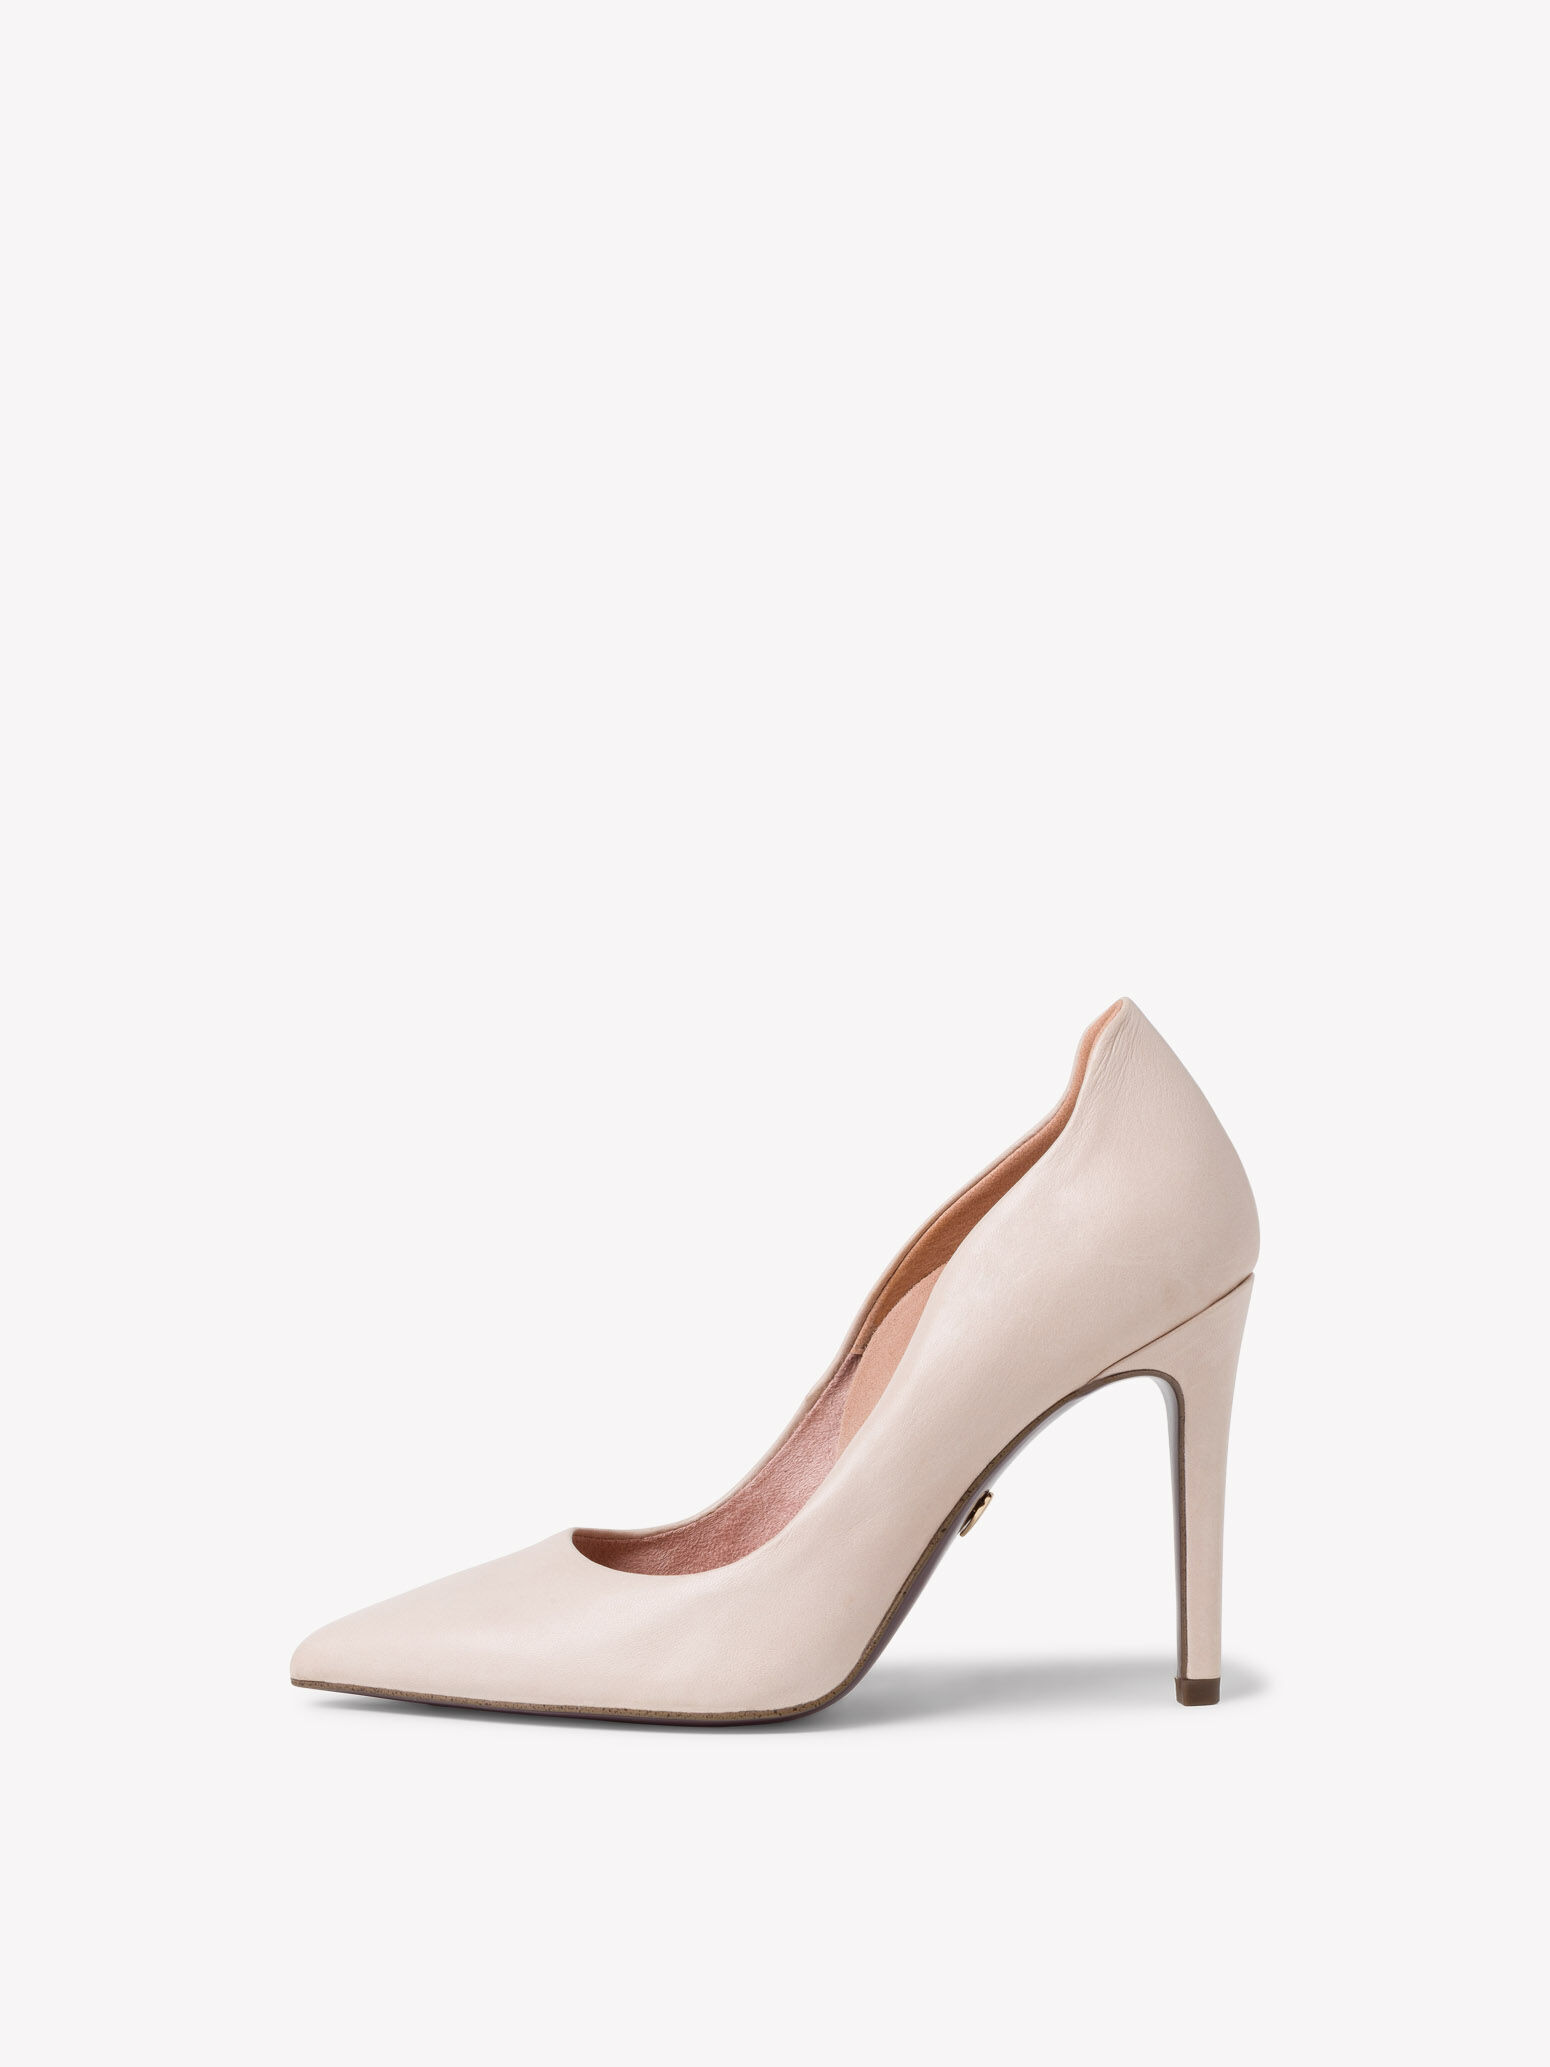 Leather Pumps - beige 1-1-22400-24-251 